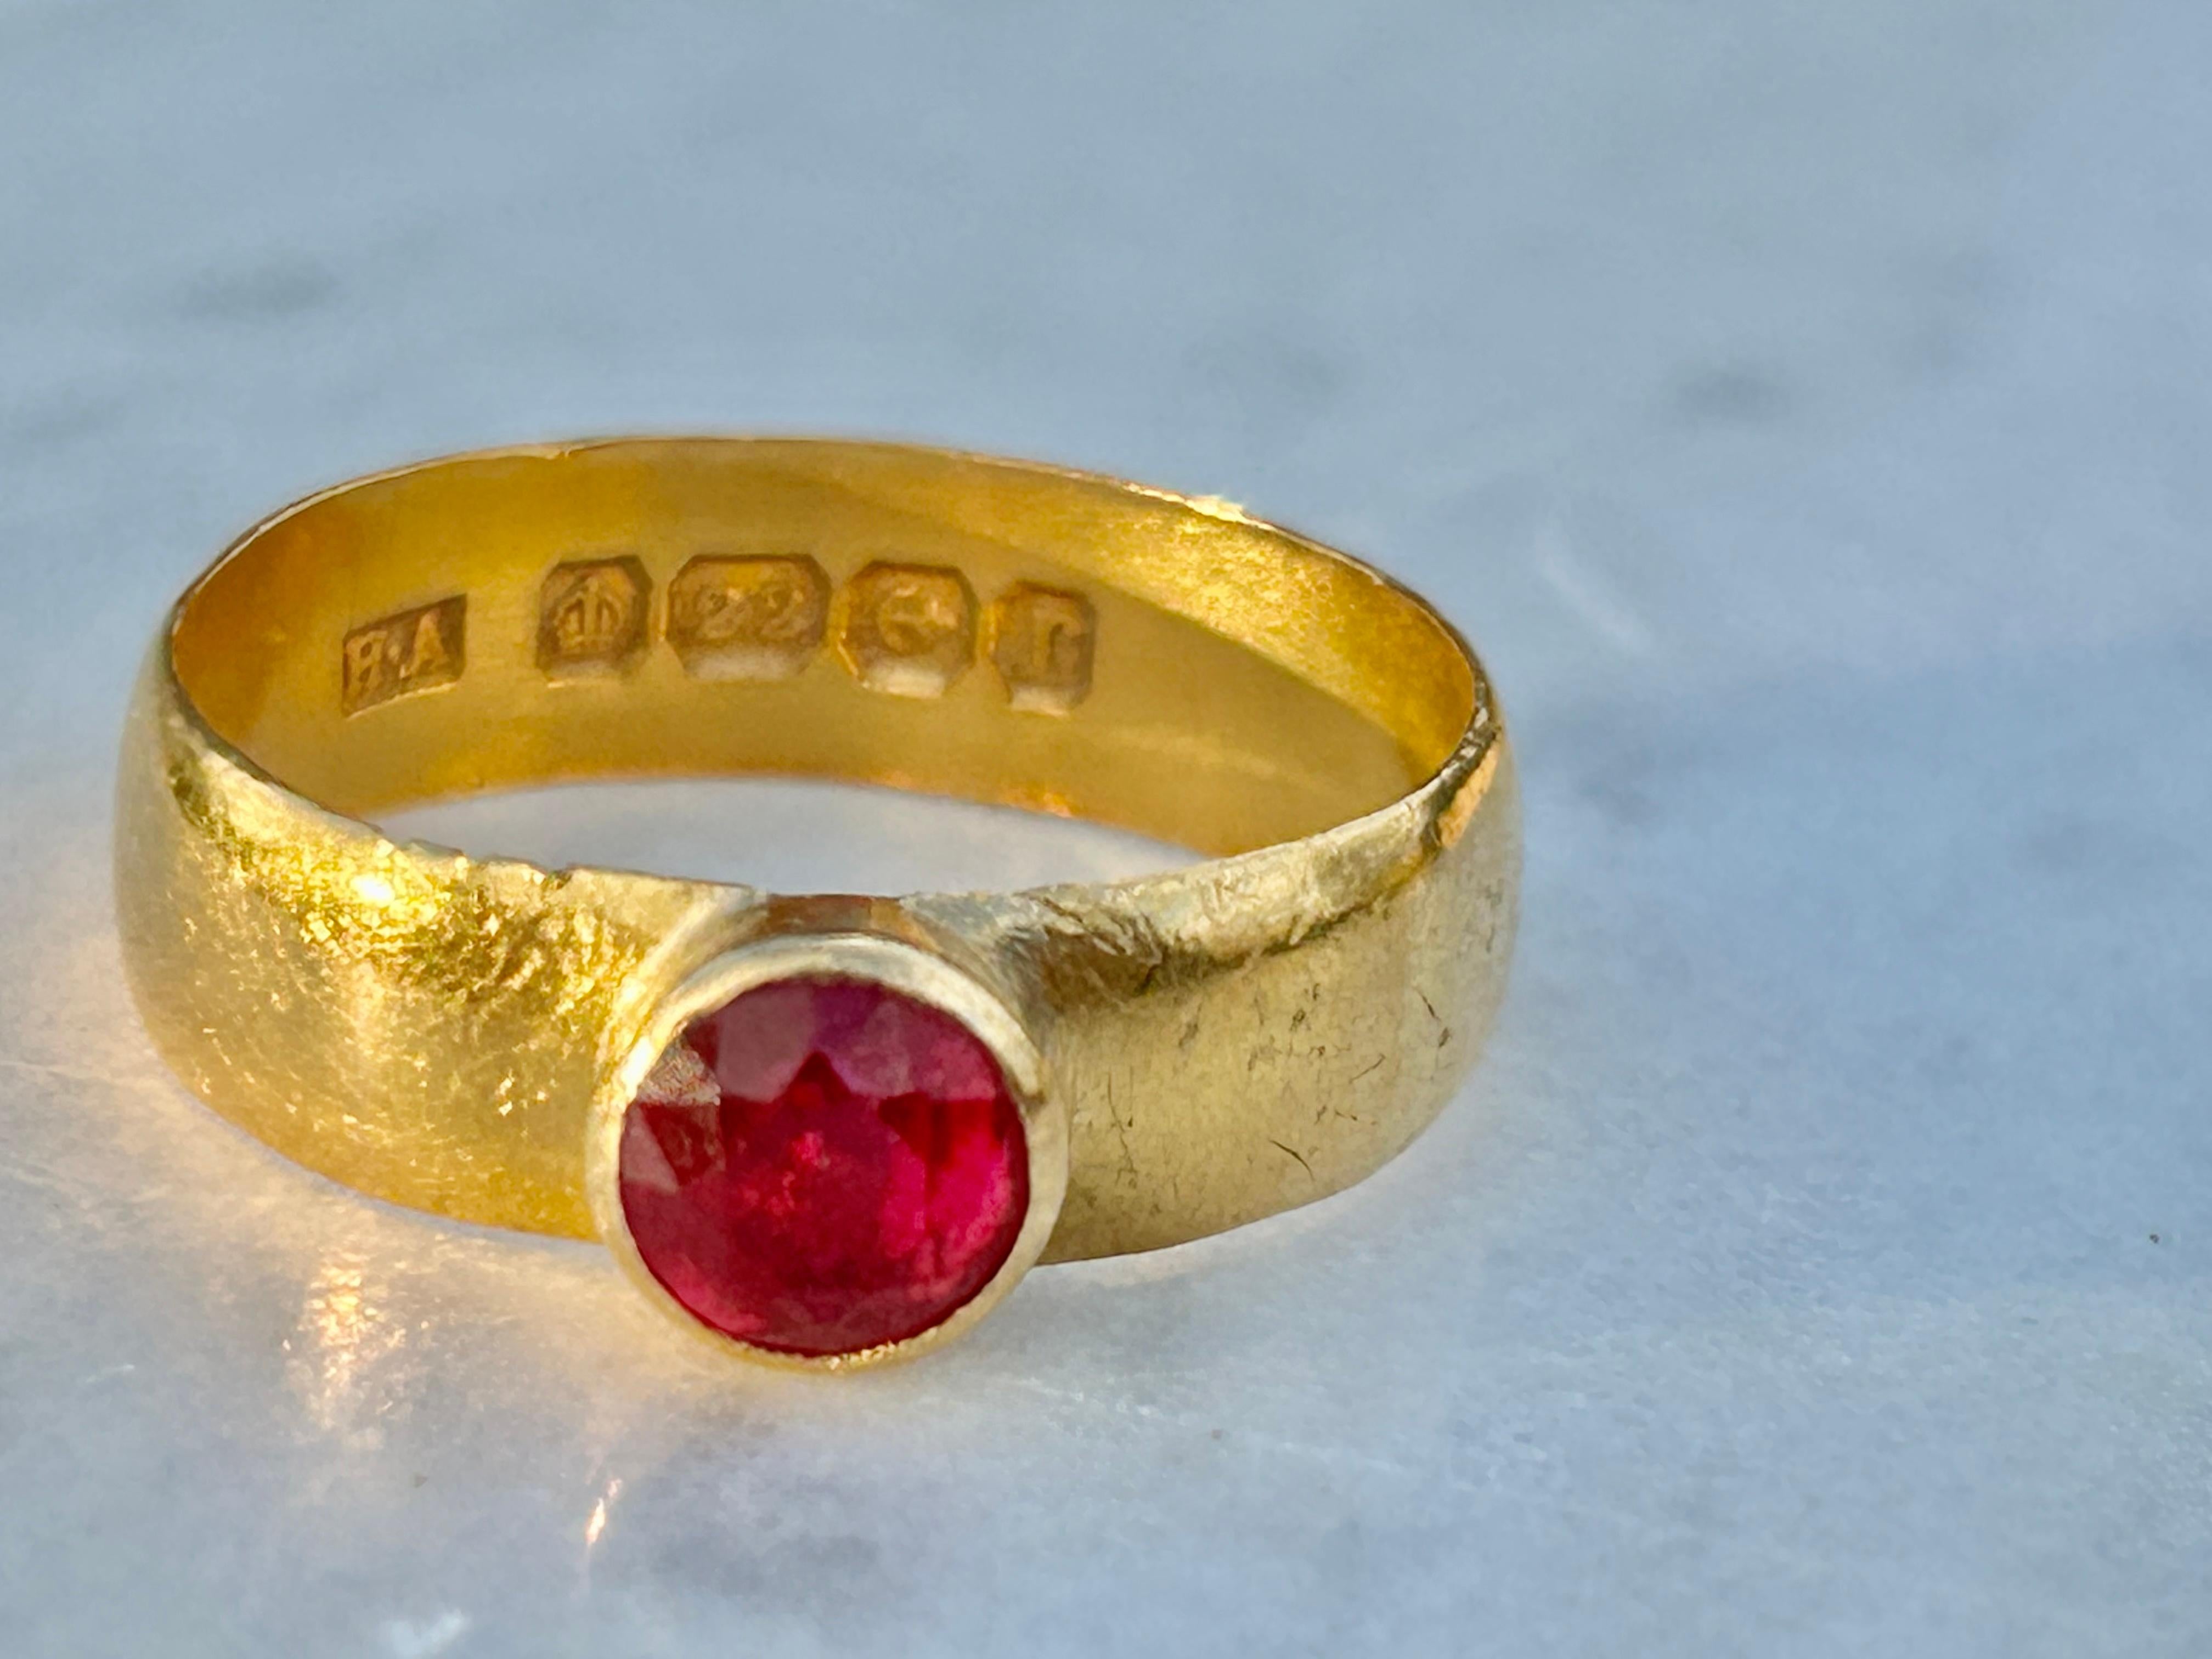 Edwardian 22k Round Ruby Ring Harry Atkins 1916 Birmingham. Size 7.25 In Good Condition For Sale In Joelton, TN